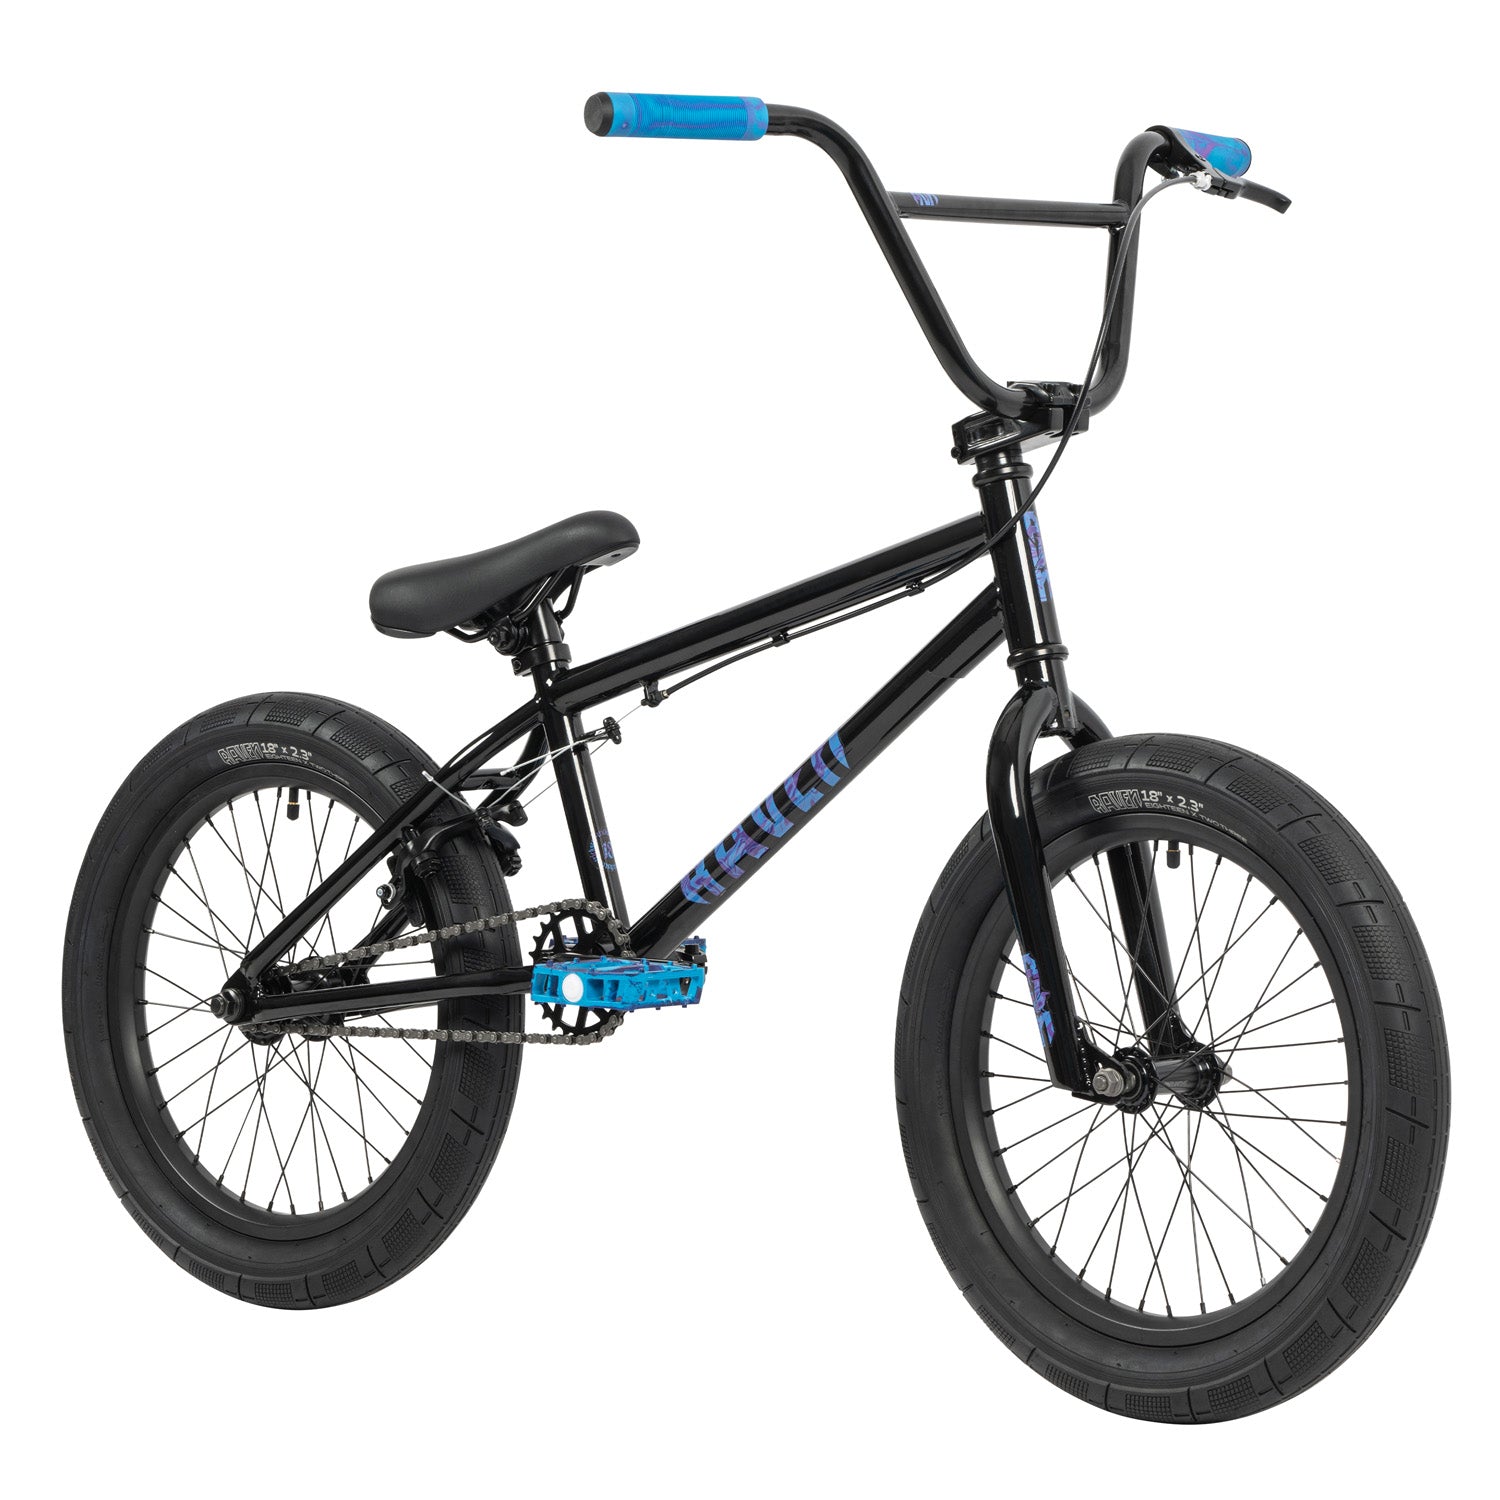 A black and blue Raven Trickster 18 Inch Bike on a white background.